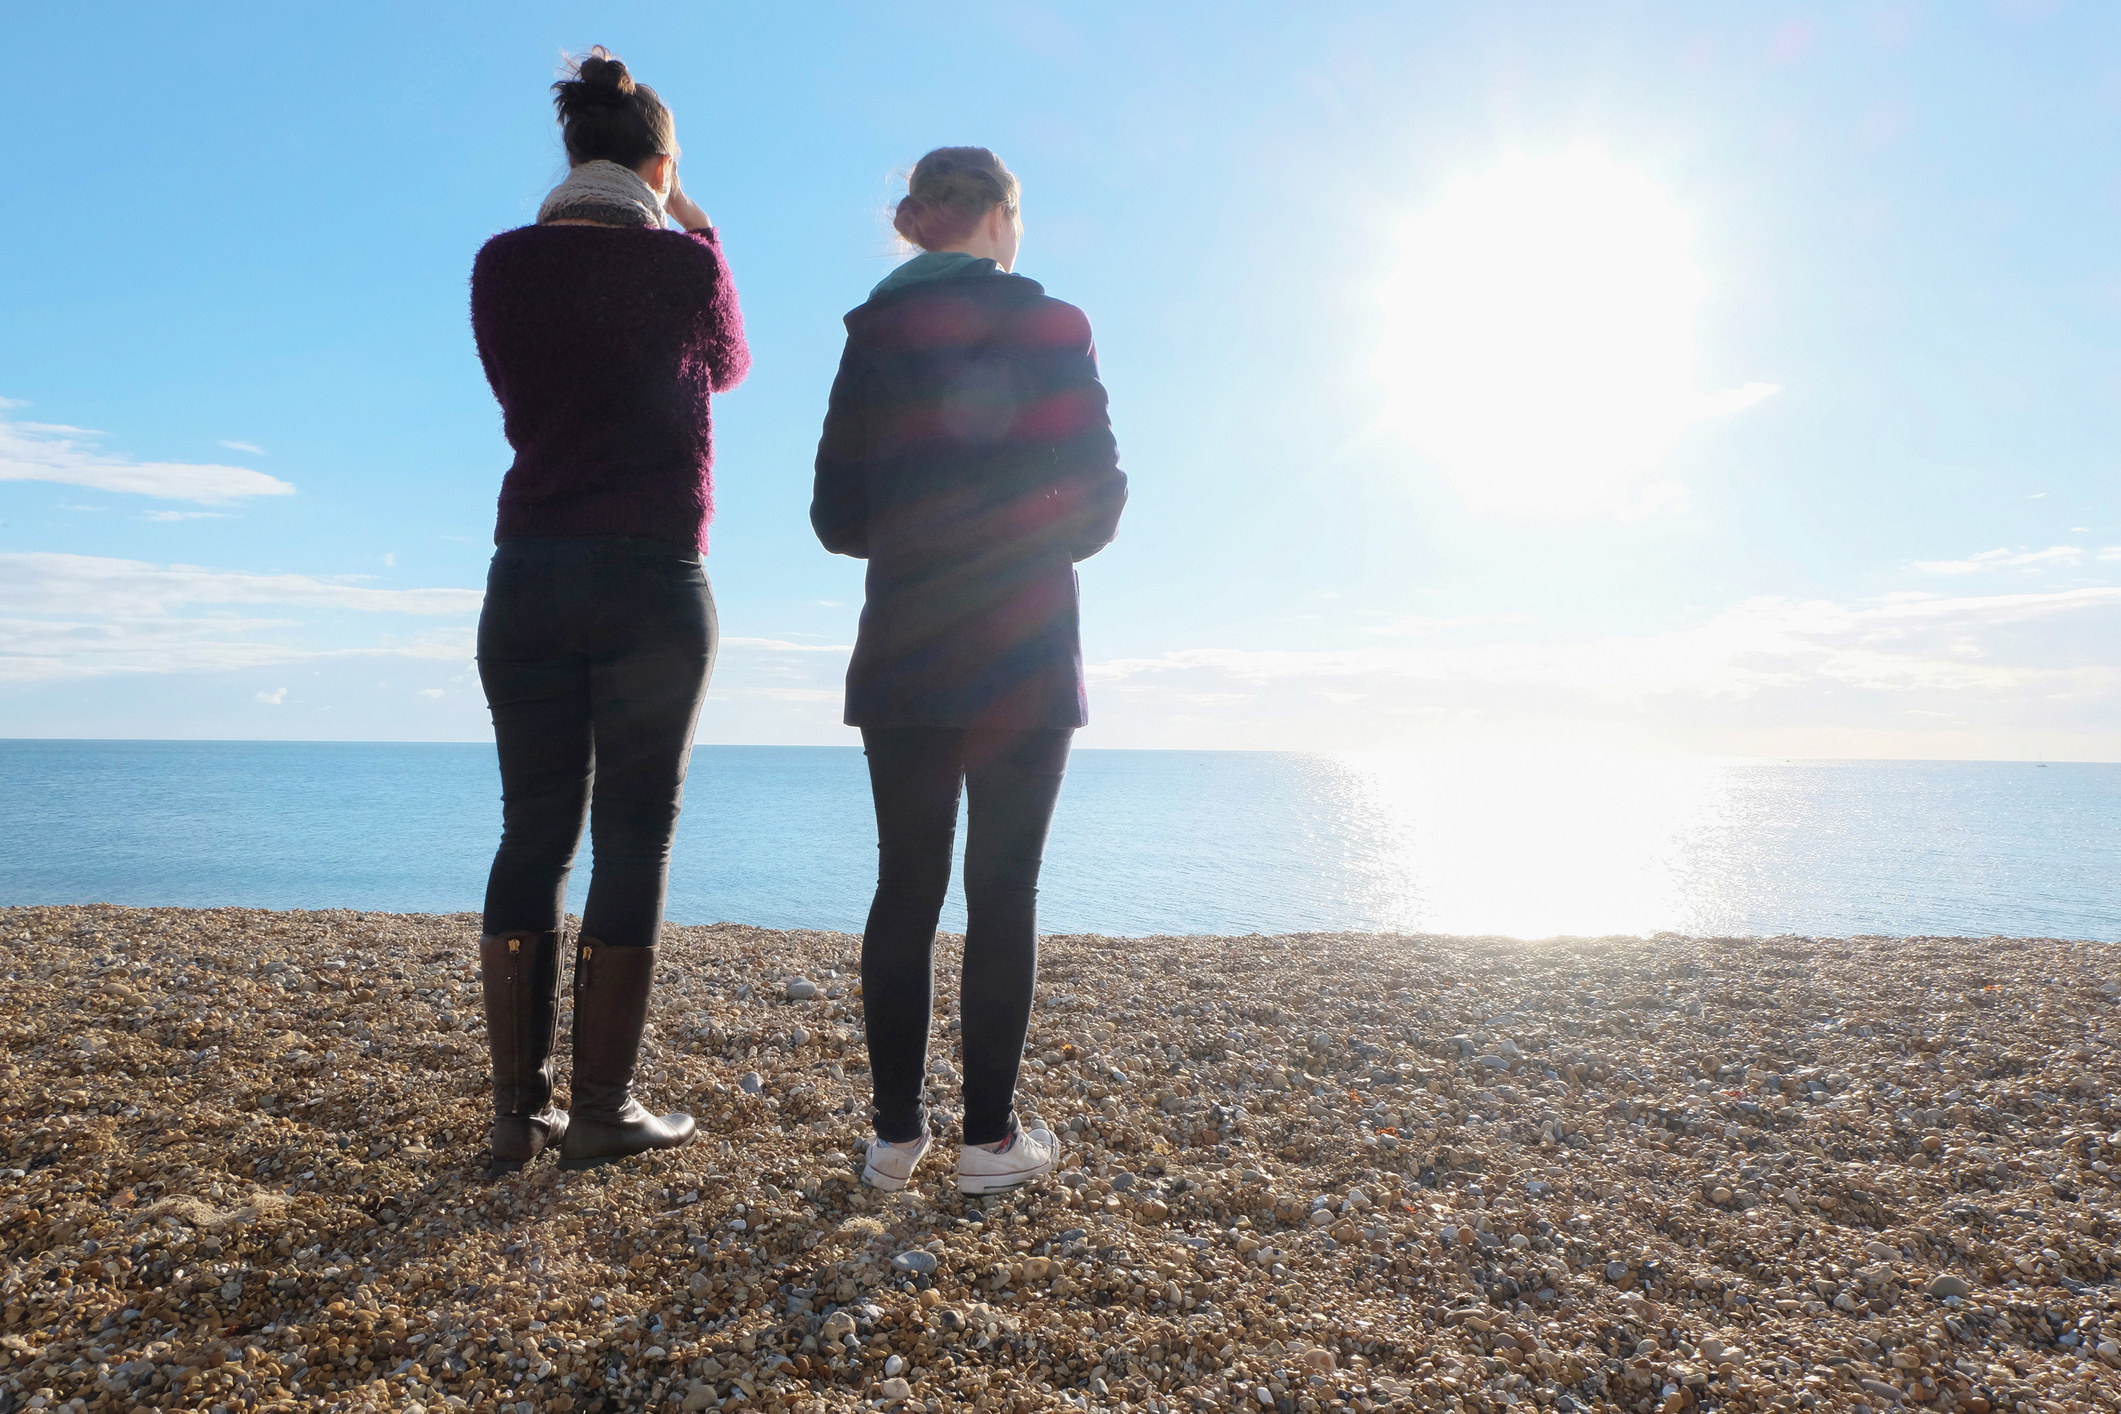 Two women standing on a beach looking out at the ocean